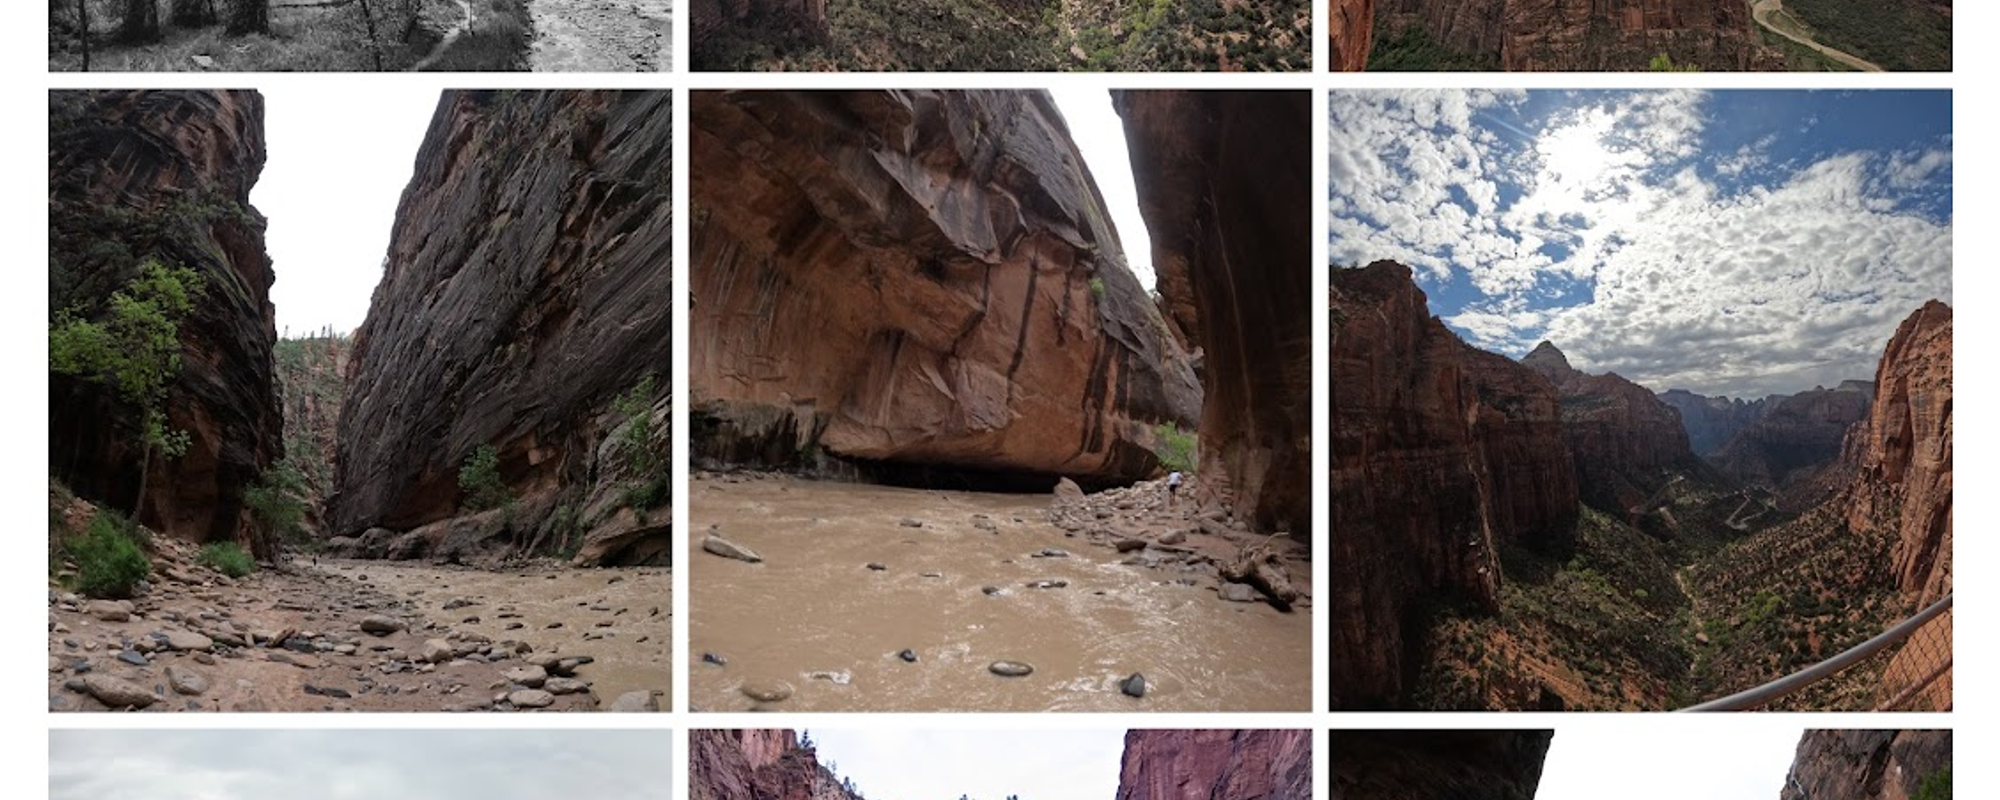 2022 Senstless Family Road Trip @ Zion Nat'l Park, The Narrows, Scout Overlook, & Canyon Overlook